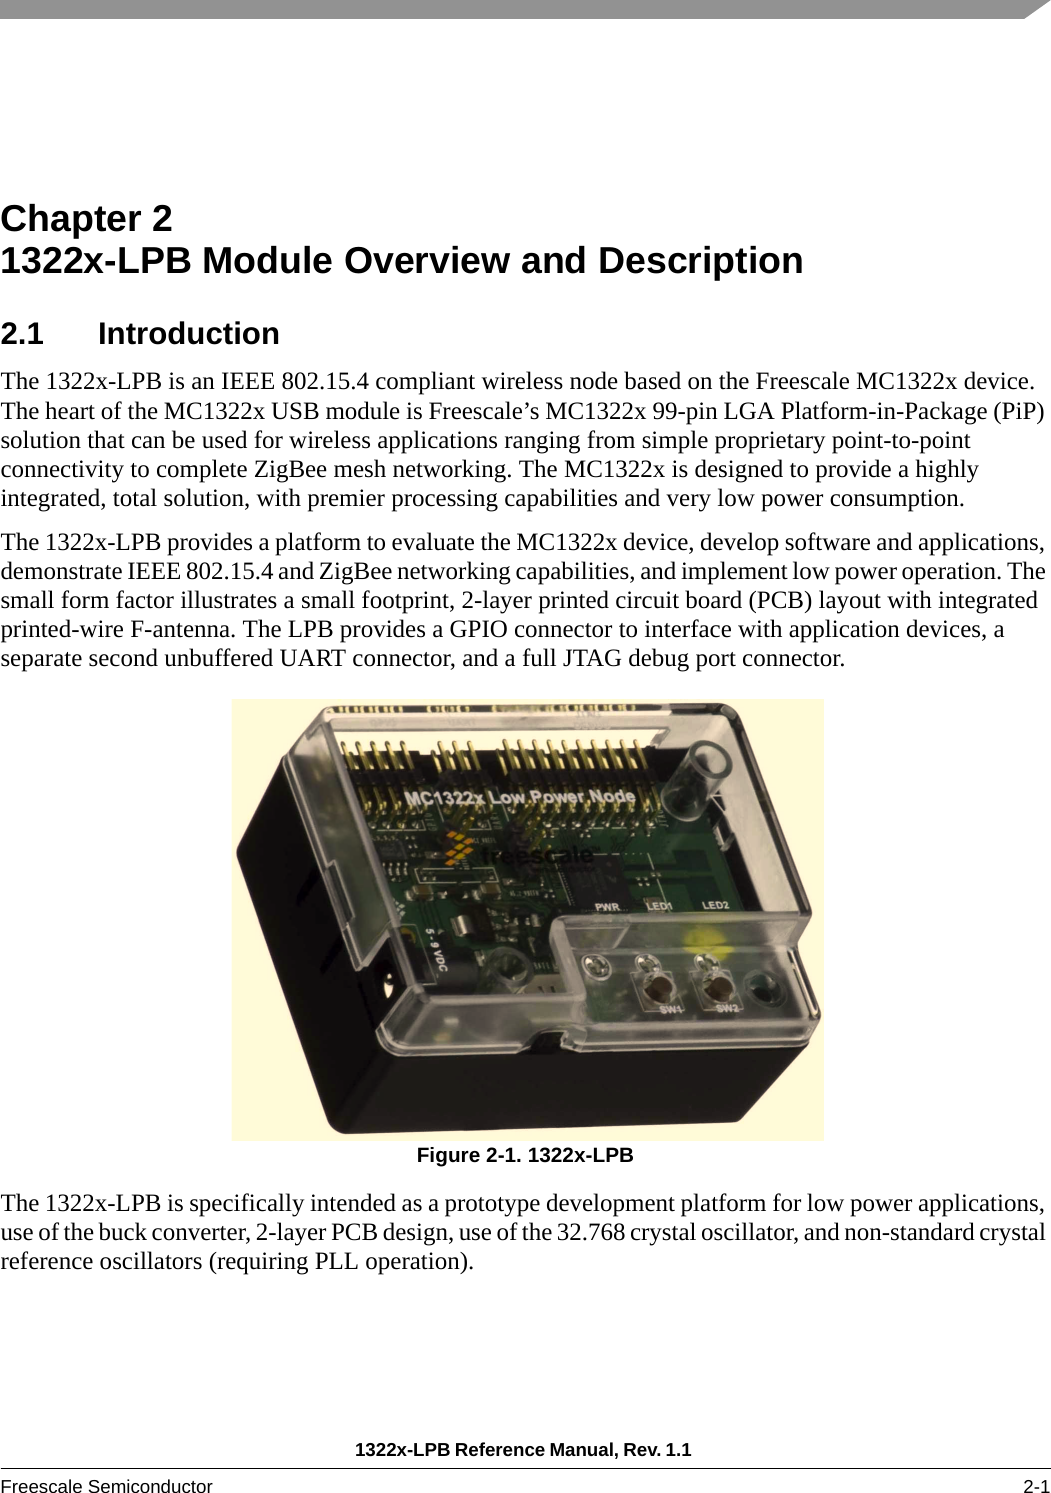 1322x-LPB Reference Manual, Rev. 1.1 Freescale Semiconductor 2-1Chapter 2  1322x-LPB Module Overview and Description2.1 IntroductionThe 1322x-LPB is an IEEE 802.15.4 compliant wireless node based on the Freescale MC1322x device. The heart of the MC1322x USB module is Freescale’s MC1322x 99-pin LGA Platform-in-Package (PiP) solution that can be used for wireless applications ranging from simple proprietary point-to-point connectivity to complete ZigBee mesh networking. The MC1322x is designed to provide a highly integrated, total solution, with premier processing capabilities and very low power consumption.The 1322x-LPB provides a platform to evaluate the MC1322x device, develop software and applications, demonstrate IEEE 802.15.4 and ZigBee networking capabilities, and implement low power operation. The small form factor illustrates a small footprint, 2-layer printed circuit board (PCB) layout with integrated printed-wire F-antenna. The LPB provides a GPIO connector to interface with application devices, a separate second unbuffered UART connector, and a full JTAG debug port connector.Figure 2-1. 1322x-LPB The 1322x-LPB is specifically intended as a prototype development platform for low power applications, use of the buck converter, 2-layer PCB design, use of the 32.768 crystal oscillator, and non-standard crystal reference oscillators (requiring PLL operation).